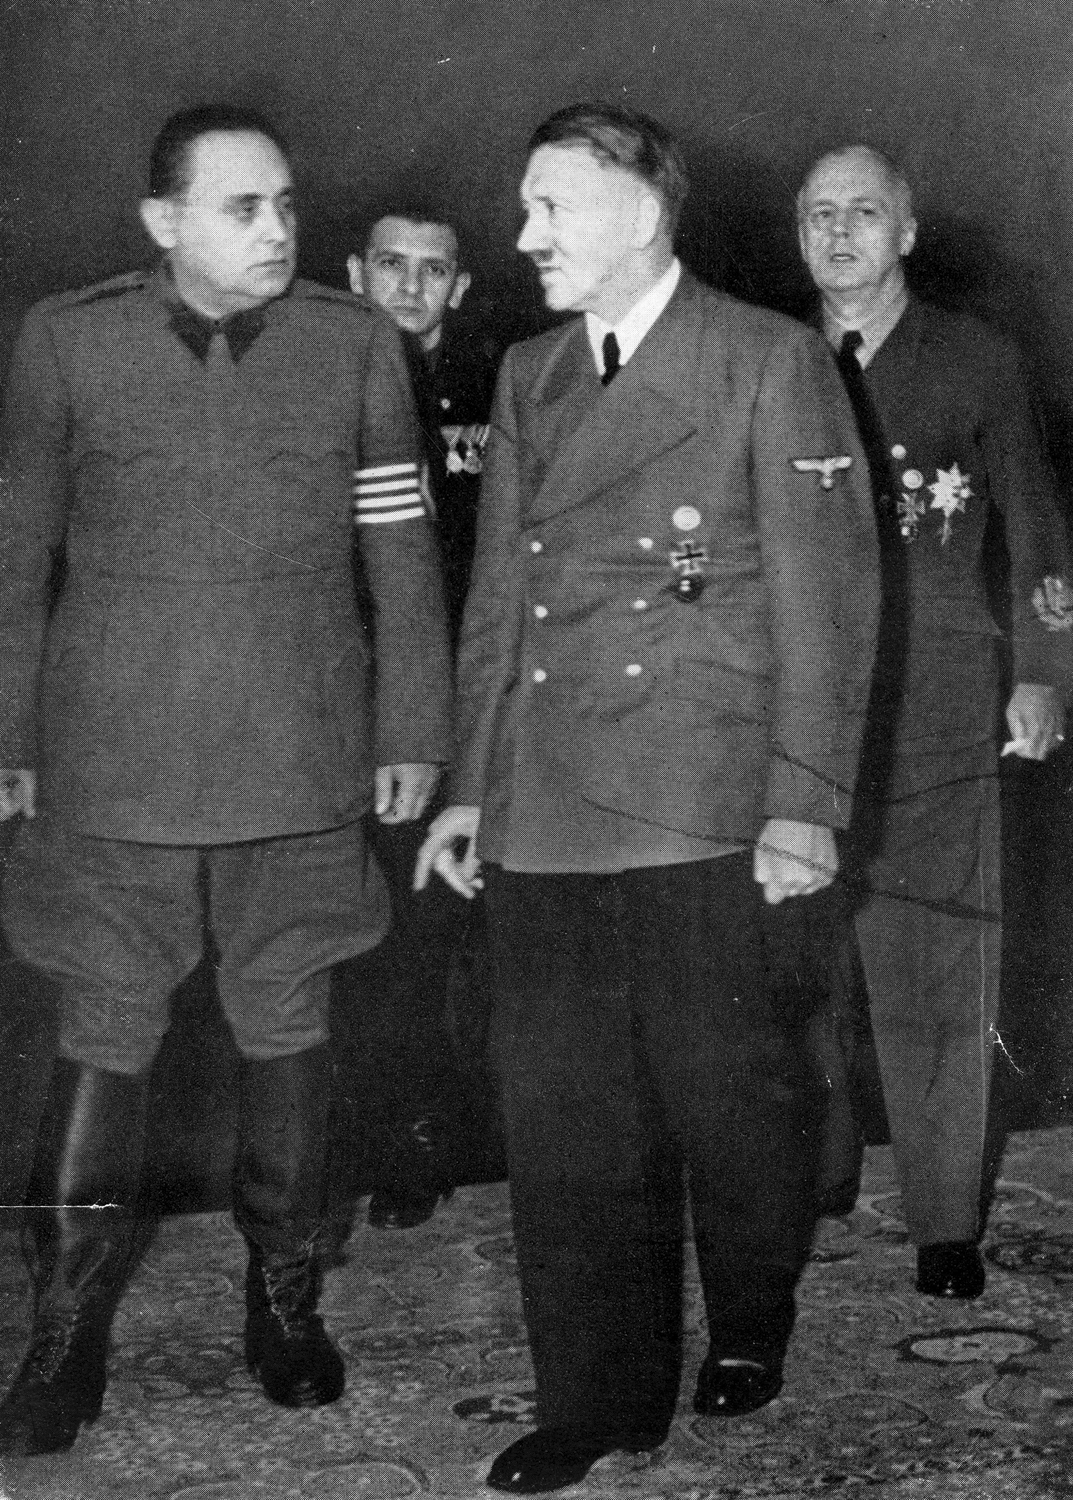 Adolf Hitler in conversation with Hungarian head of state Ferenc Szalasi in the Reichskanzlei